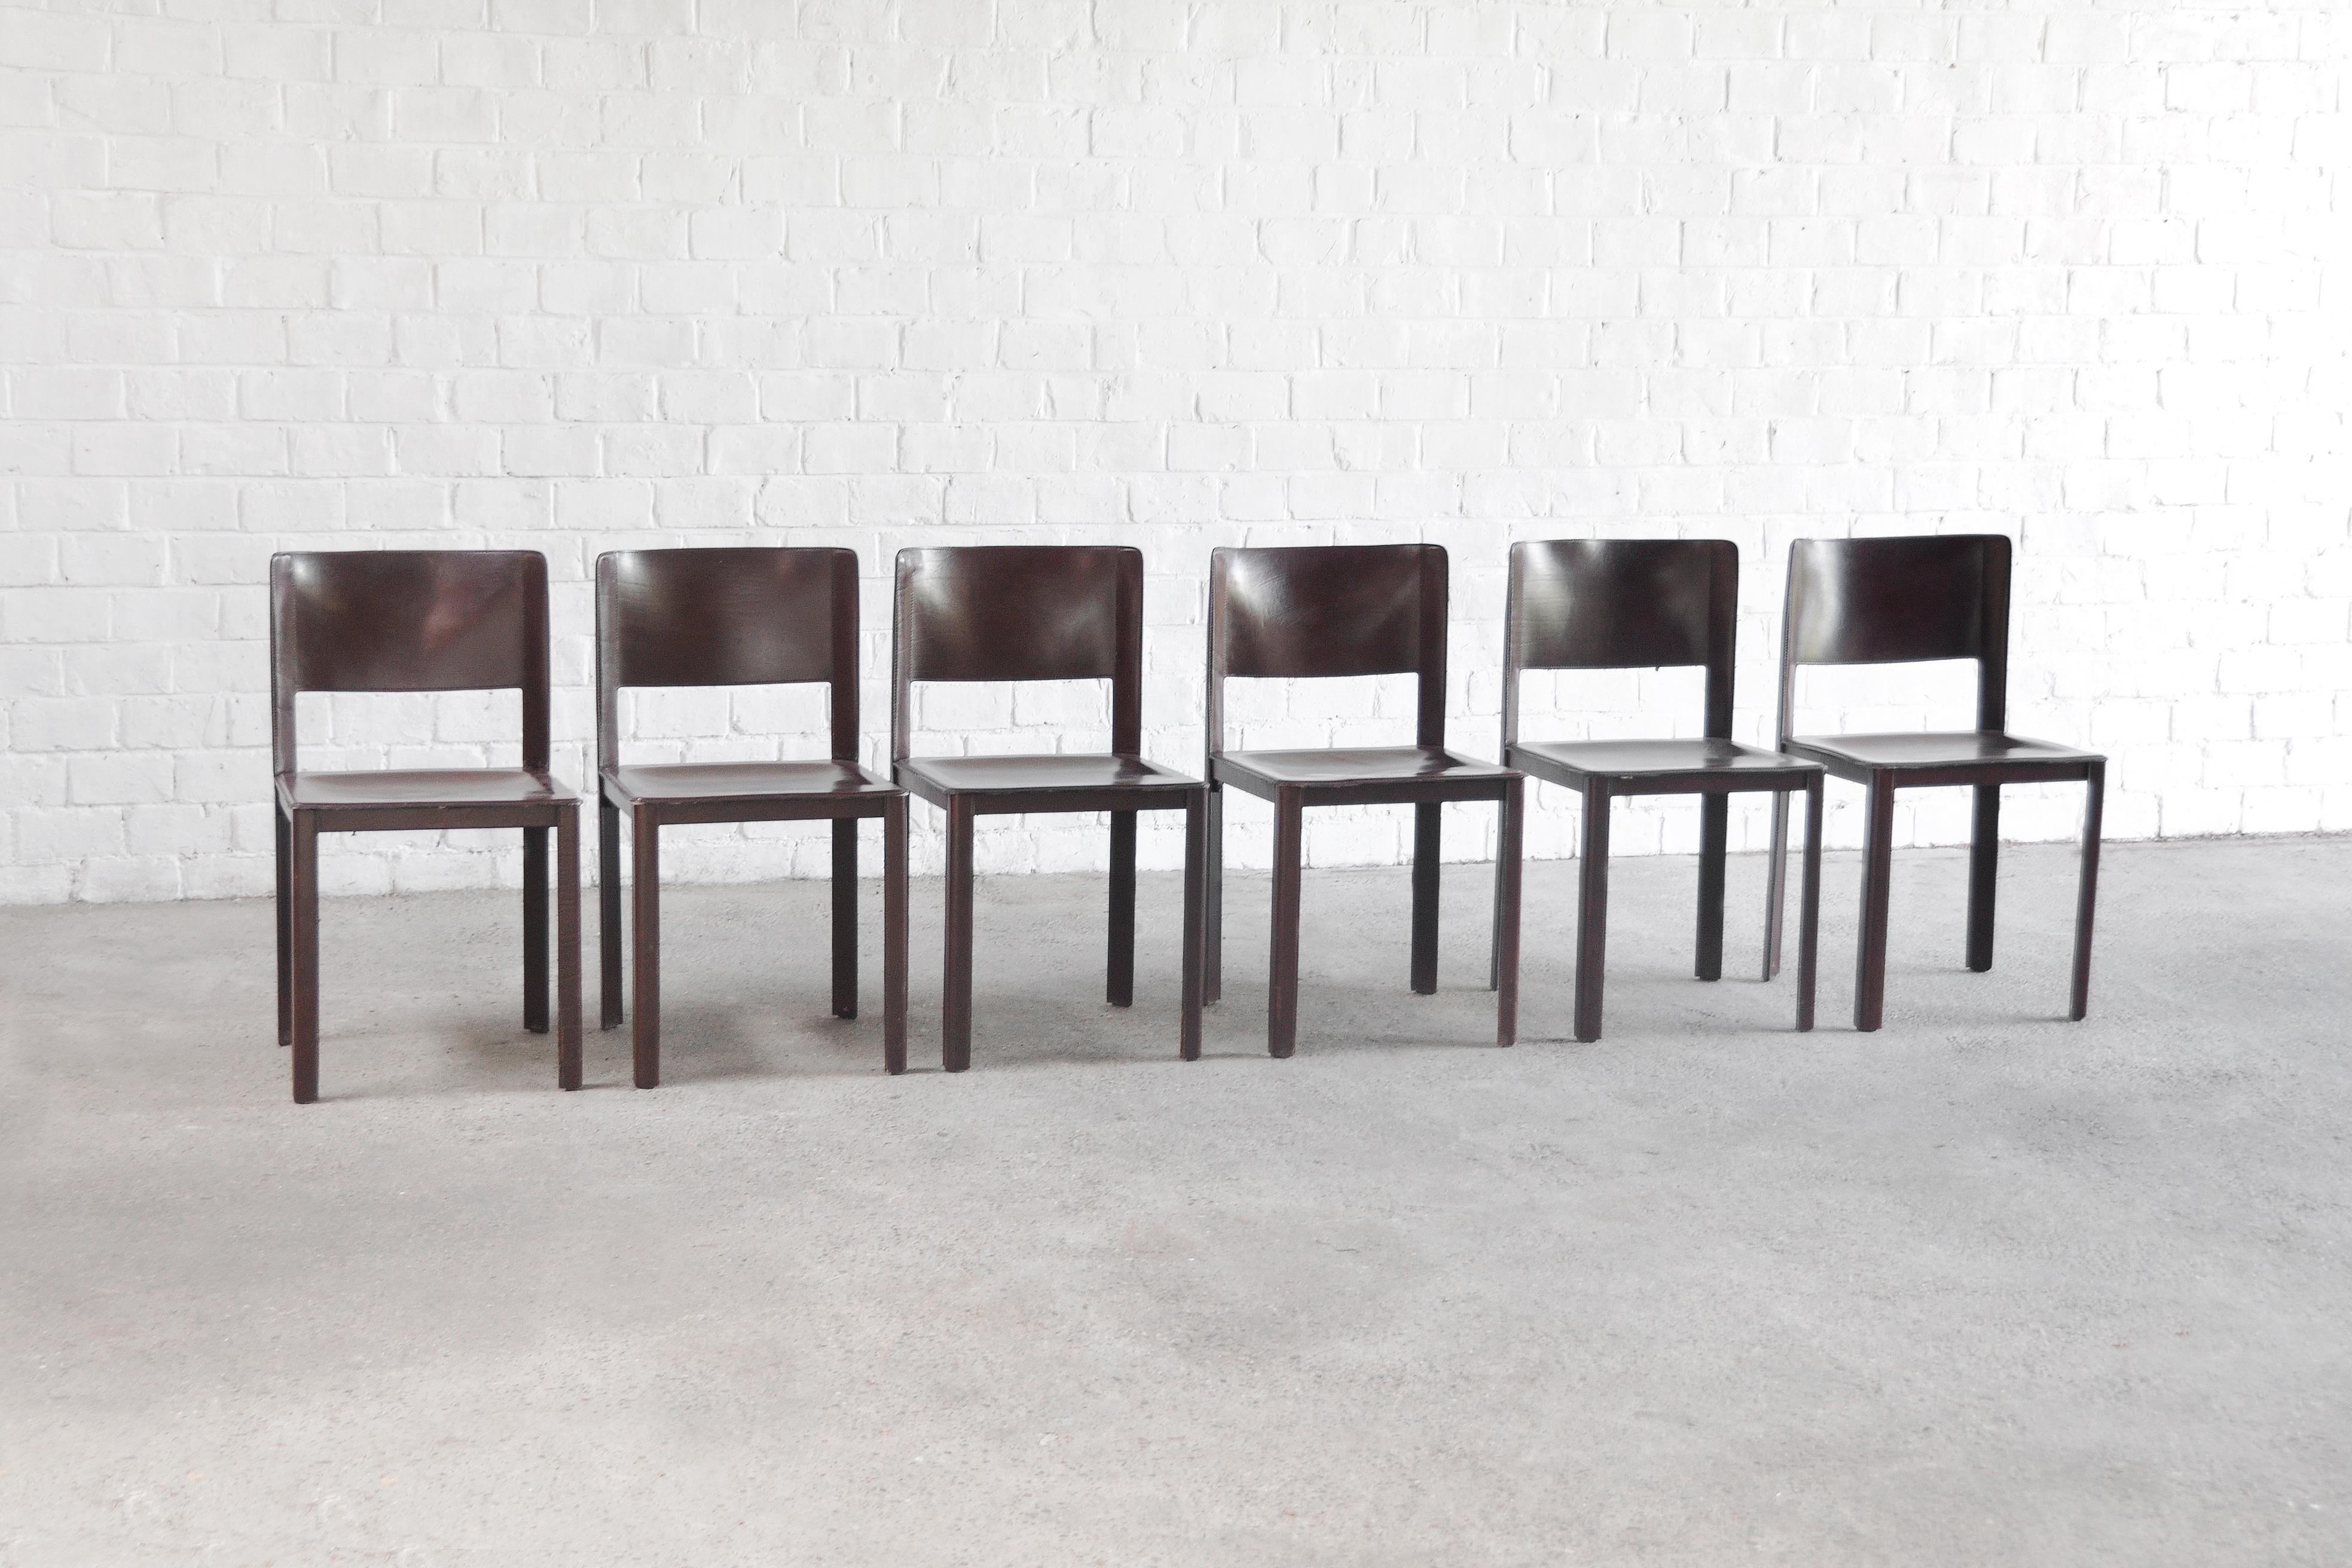 A set of six sophisticated 'Coral' dining chairs by Matteo Grassi, made in Italy late 70's or early 80's. These chairs show a high level of manufacturing with a very sturdy structure and quality thick stiched leather. The leather has an elegant and